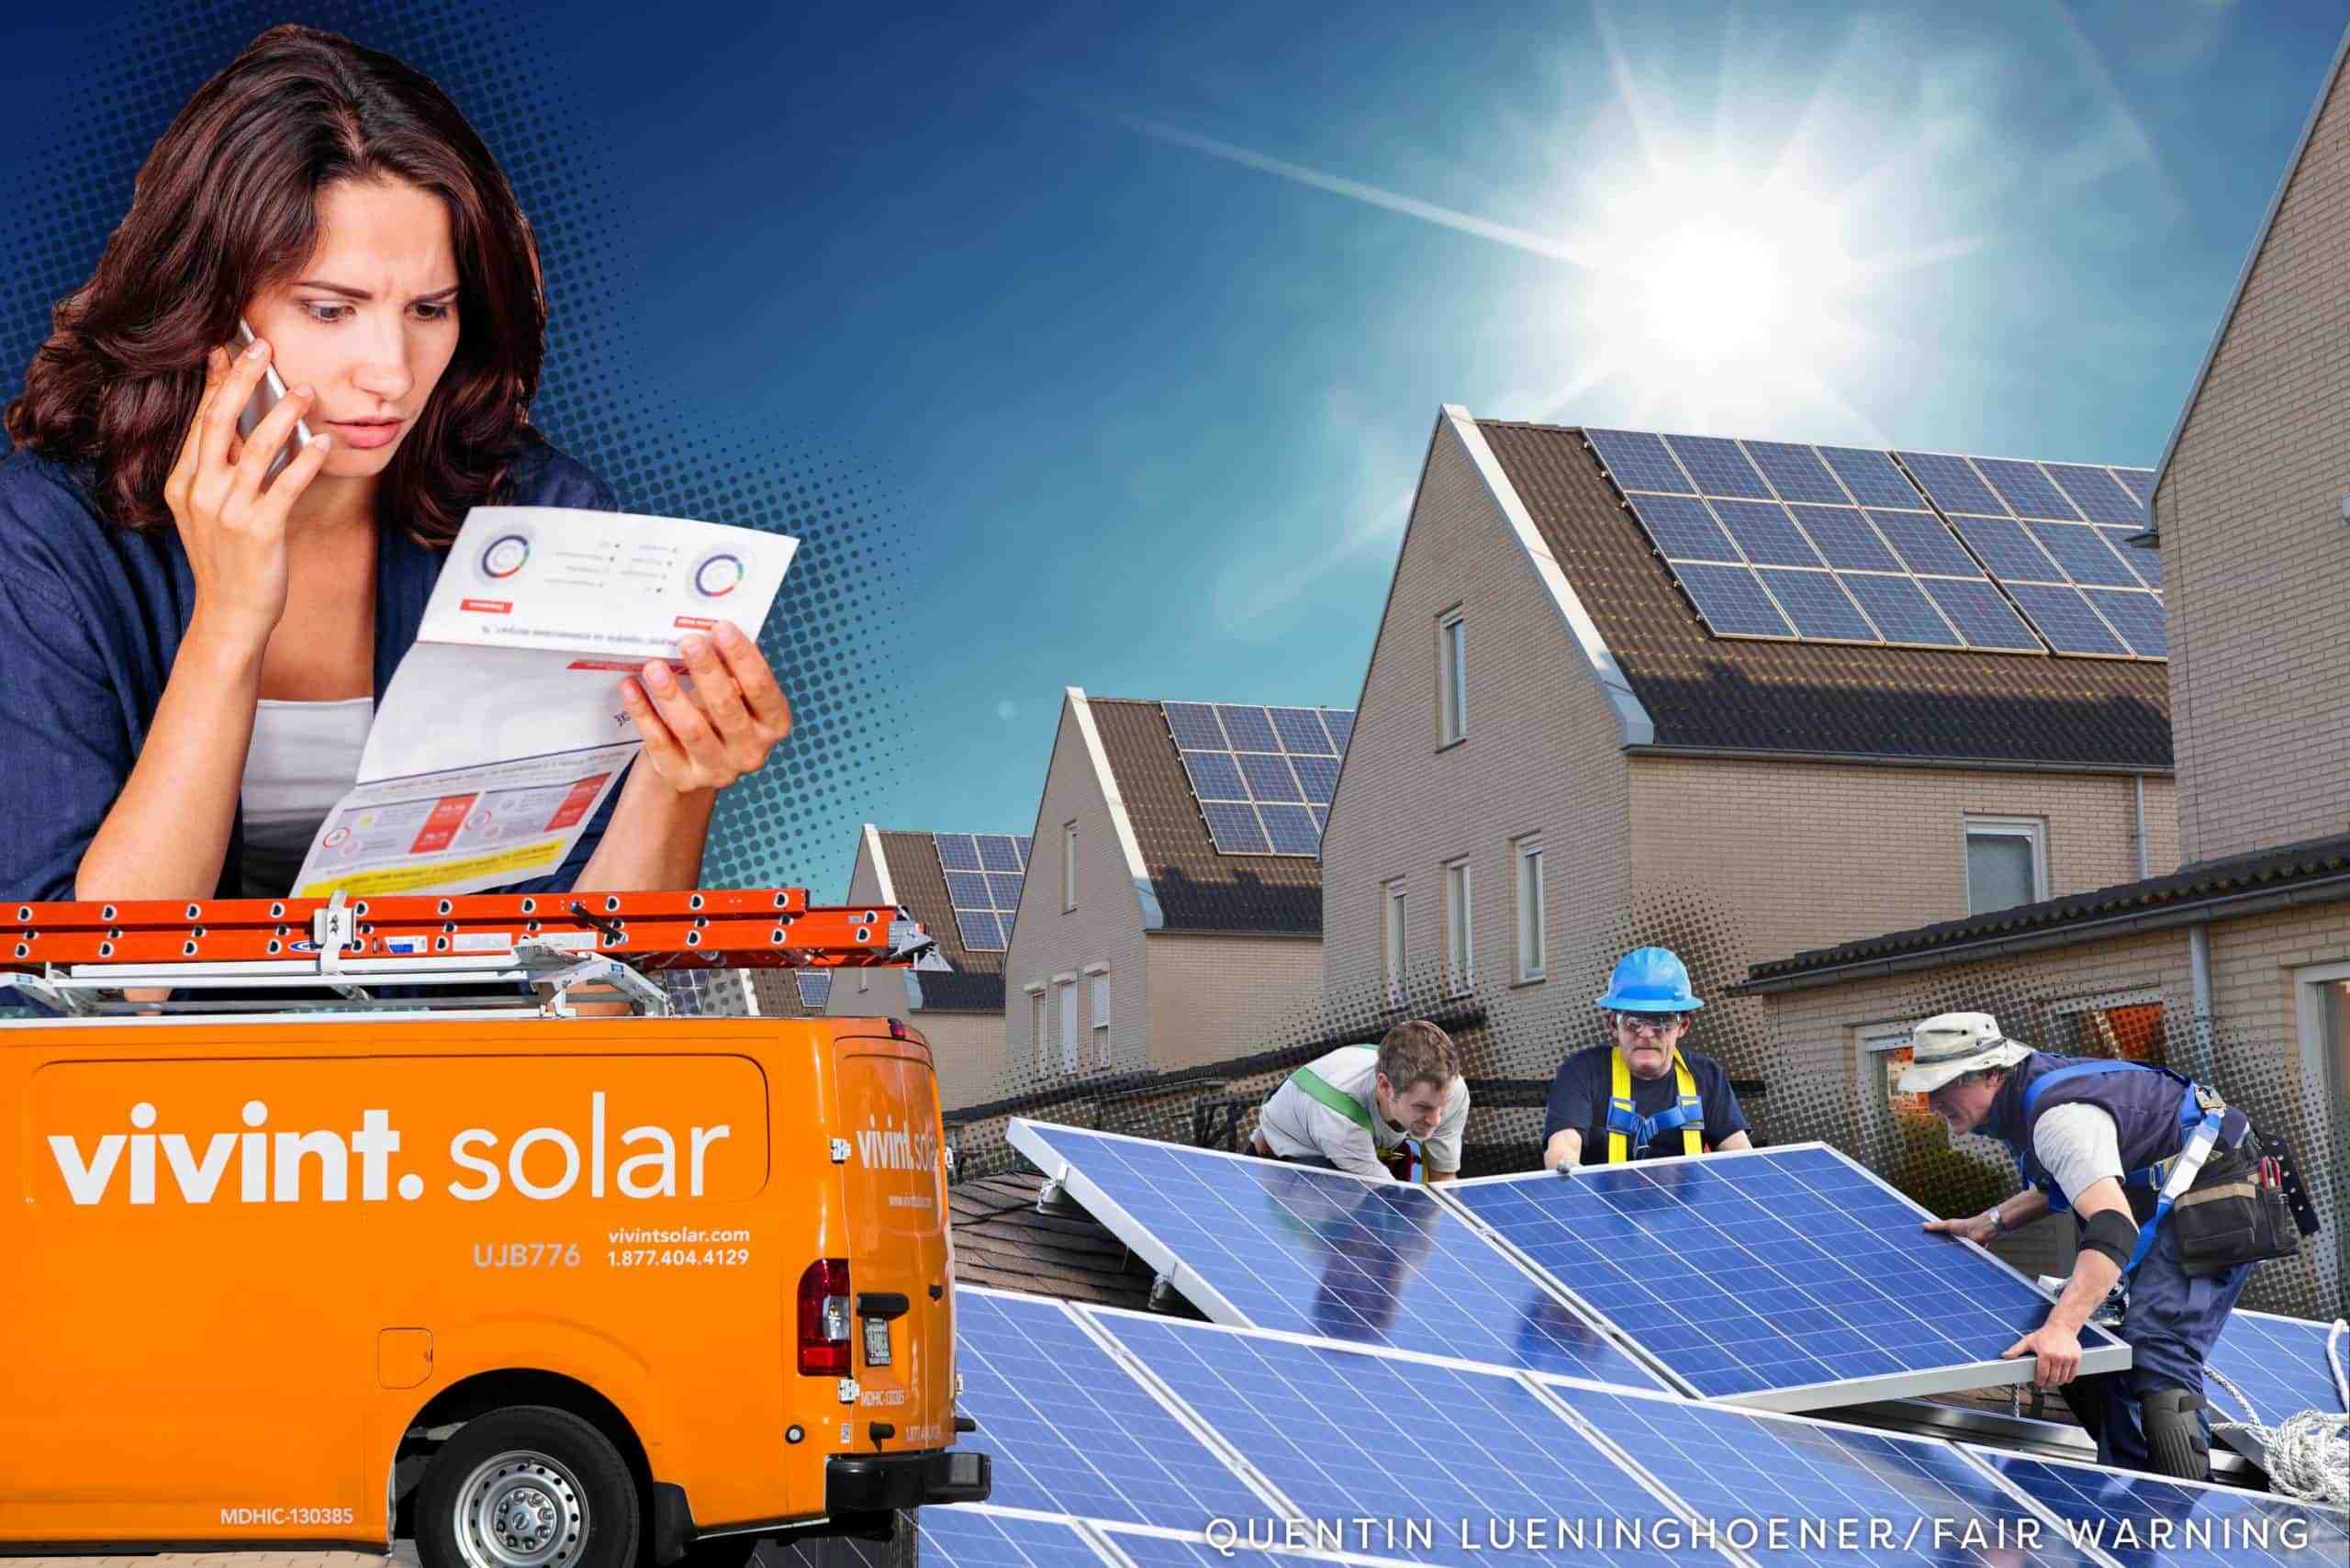 Who is SolarCity owned by?